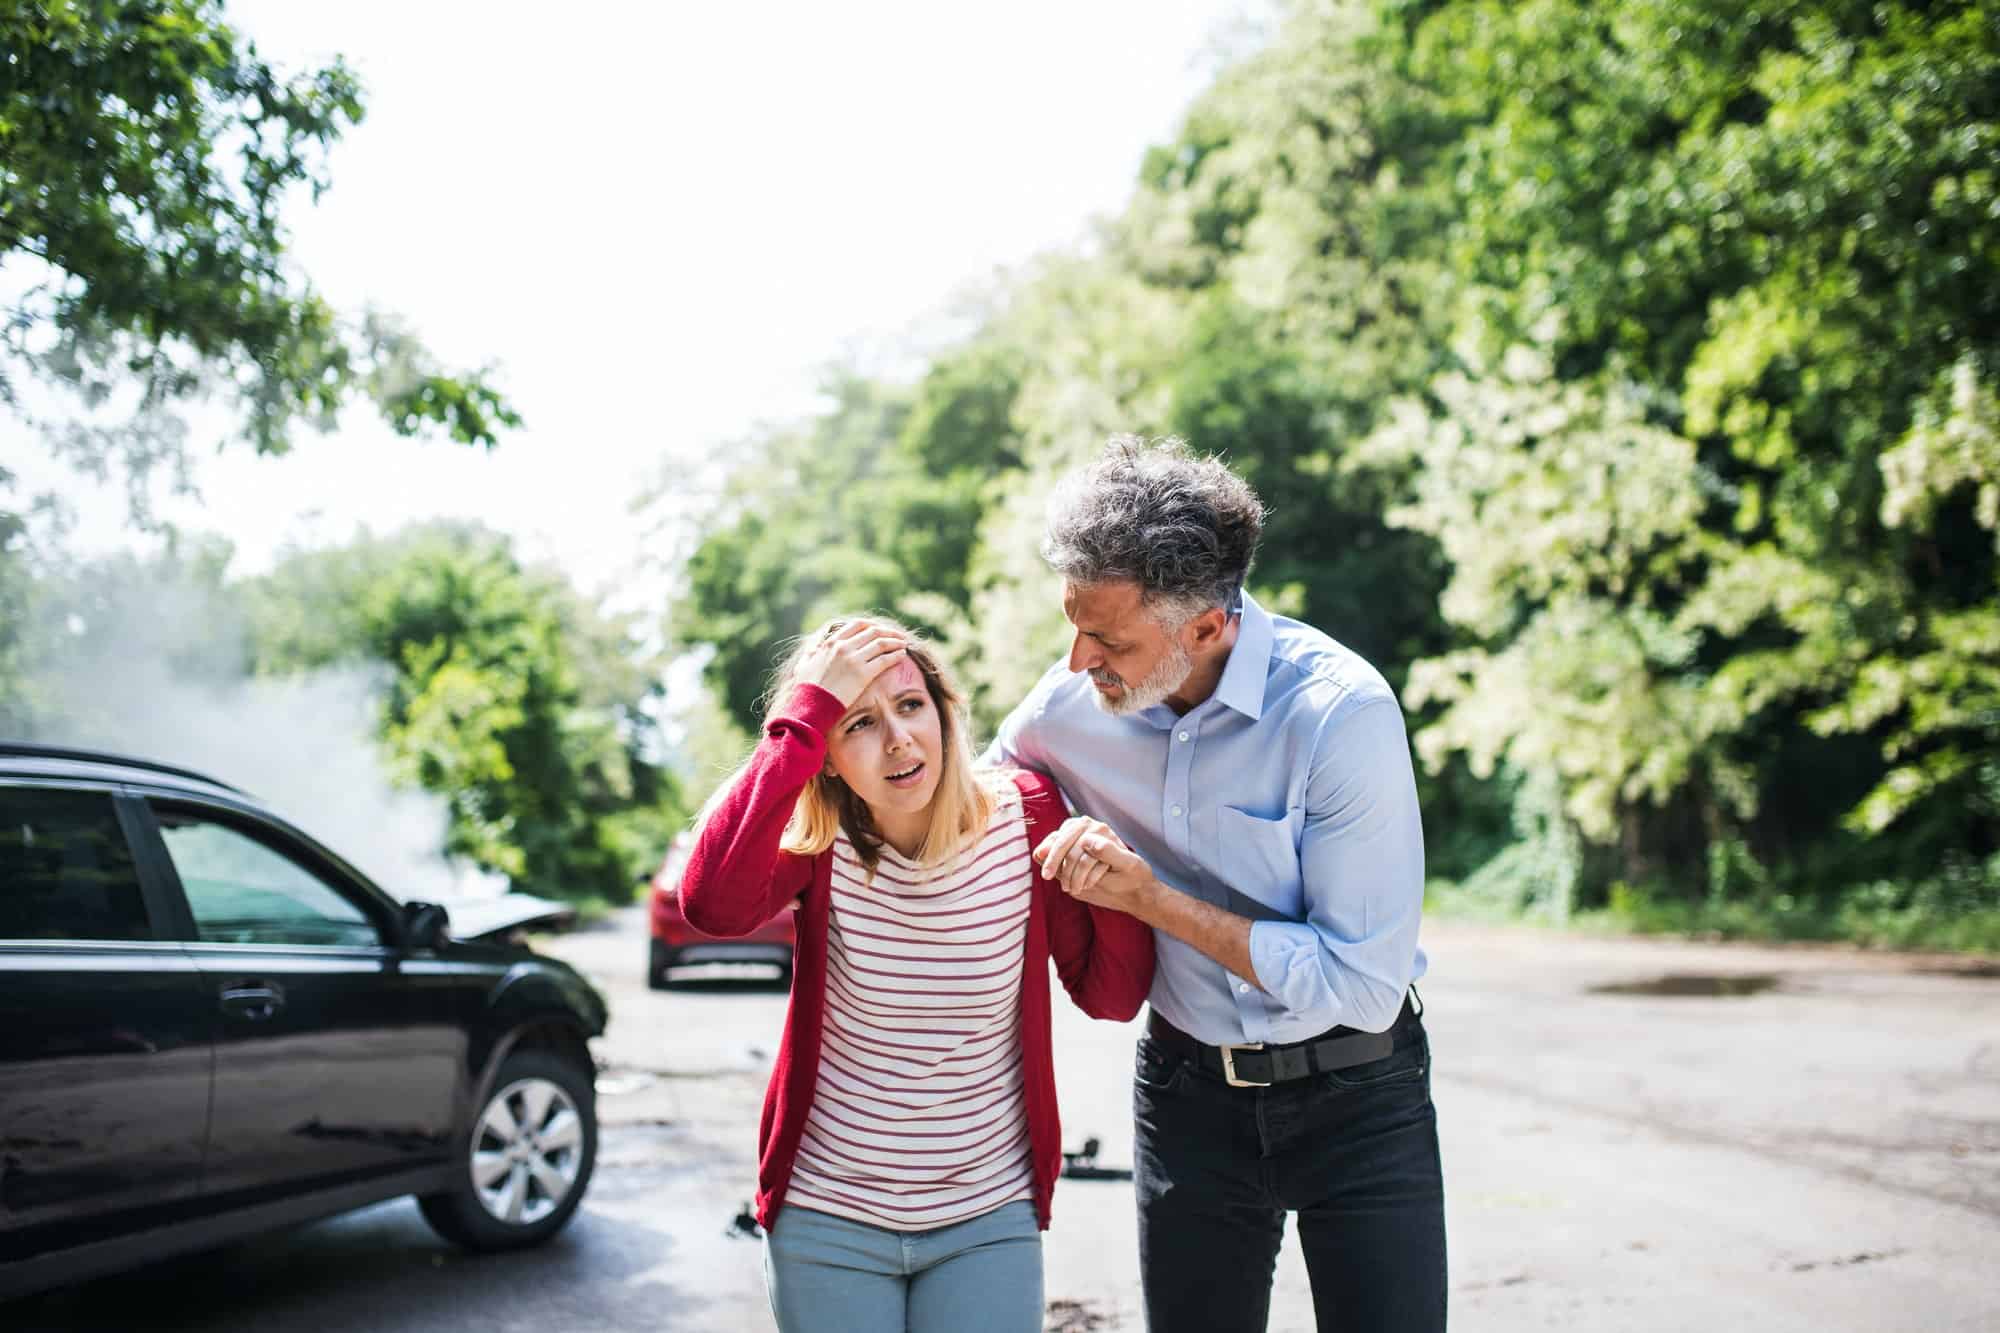 a mature man helping a young woman to walk after a car accident